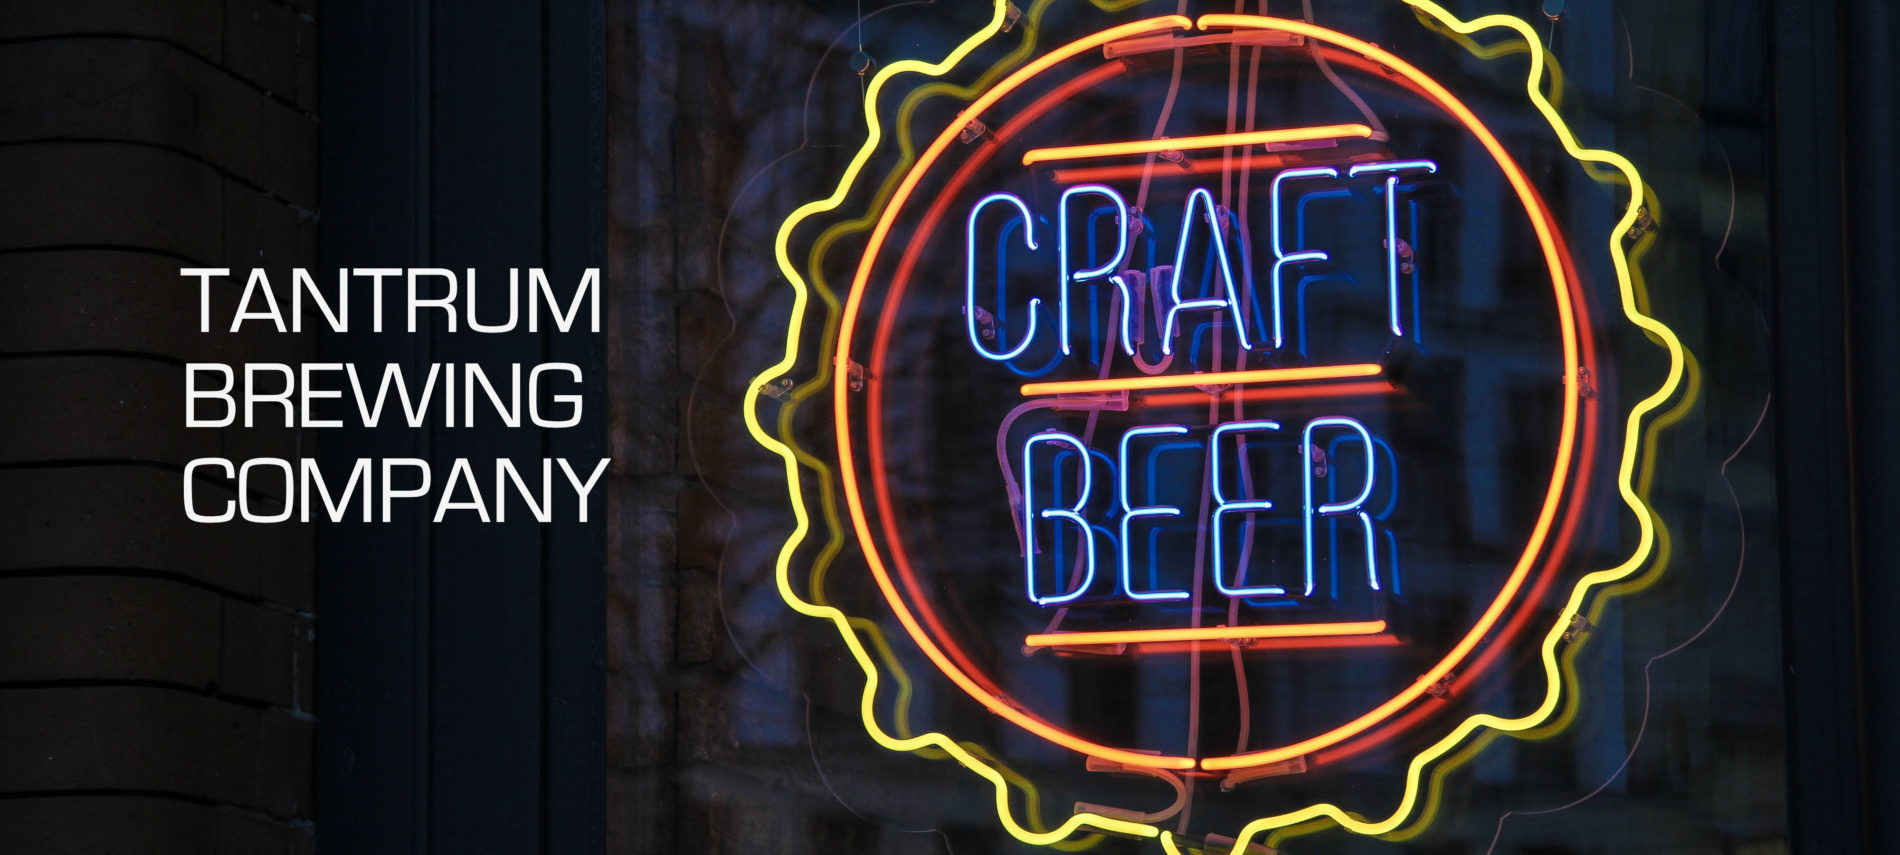 Neon beer sign that says "Craft Beer" with title "Tantrum Brewing Company".